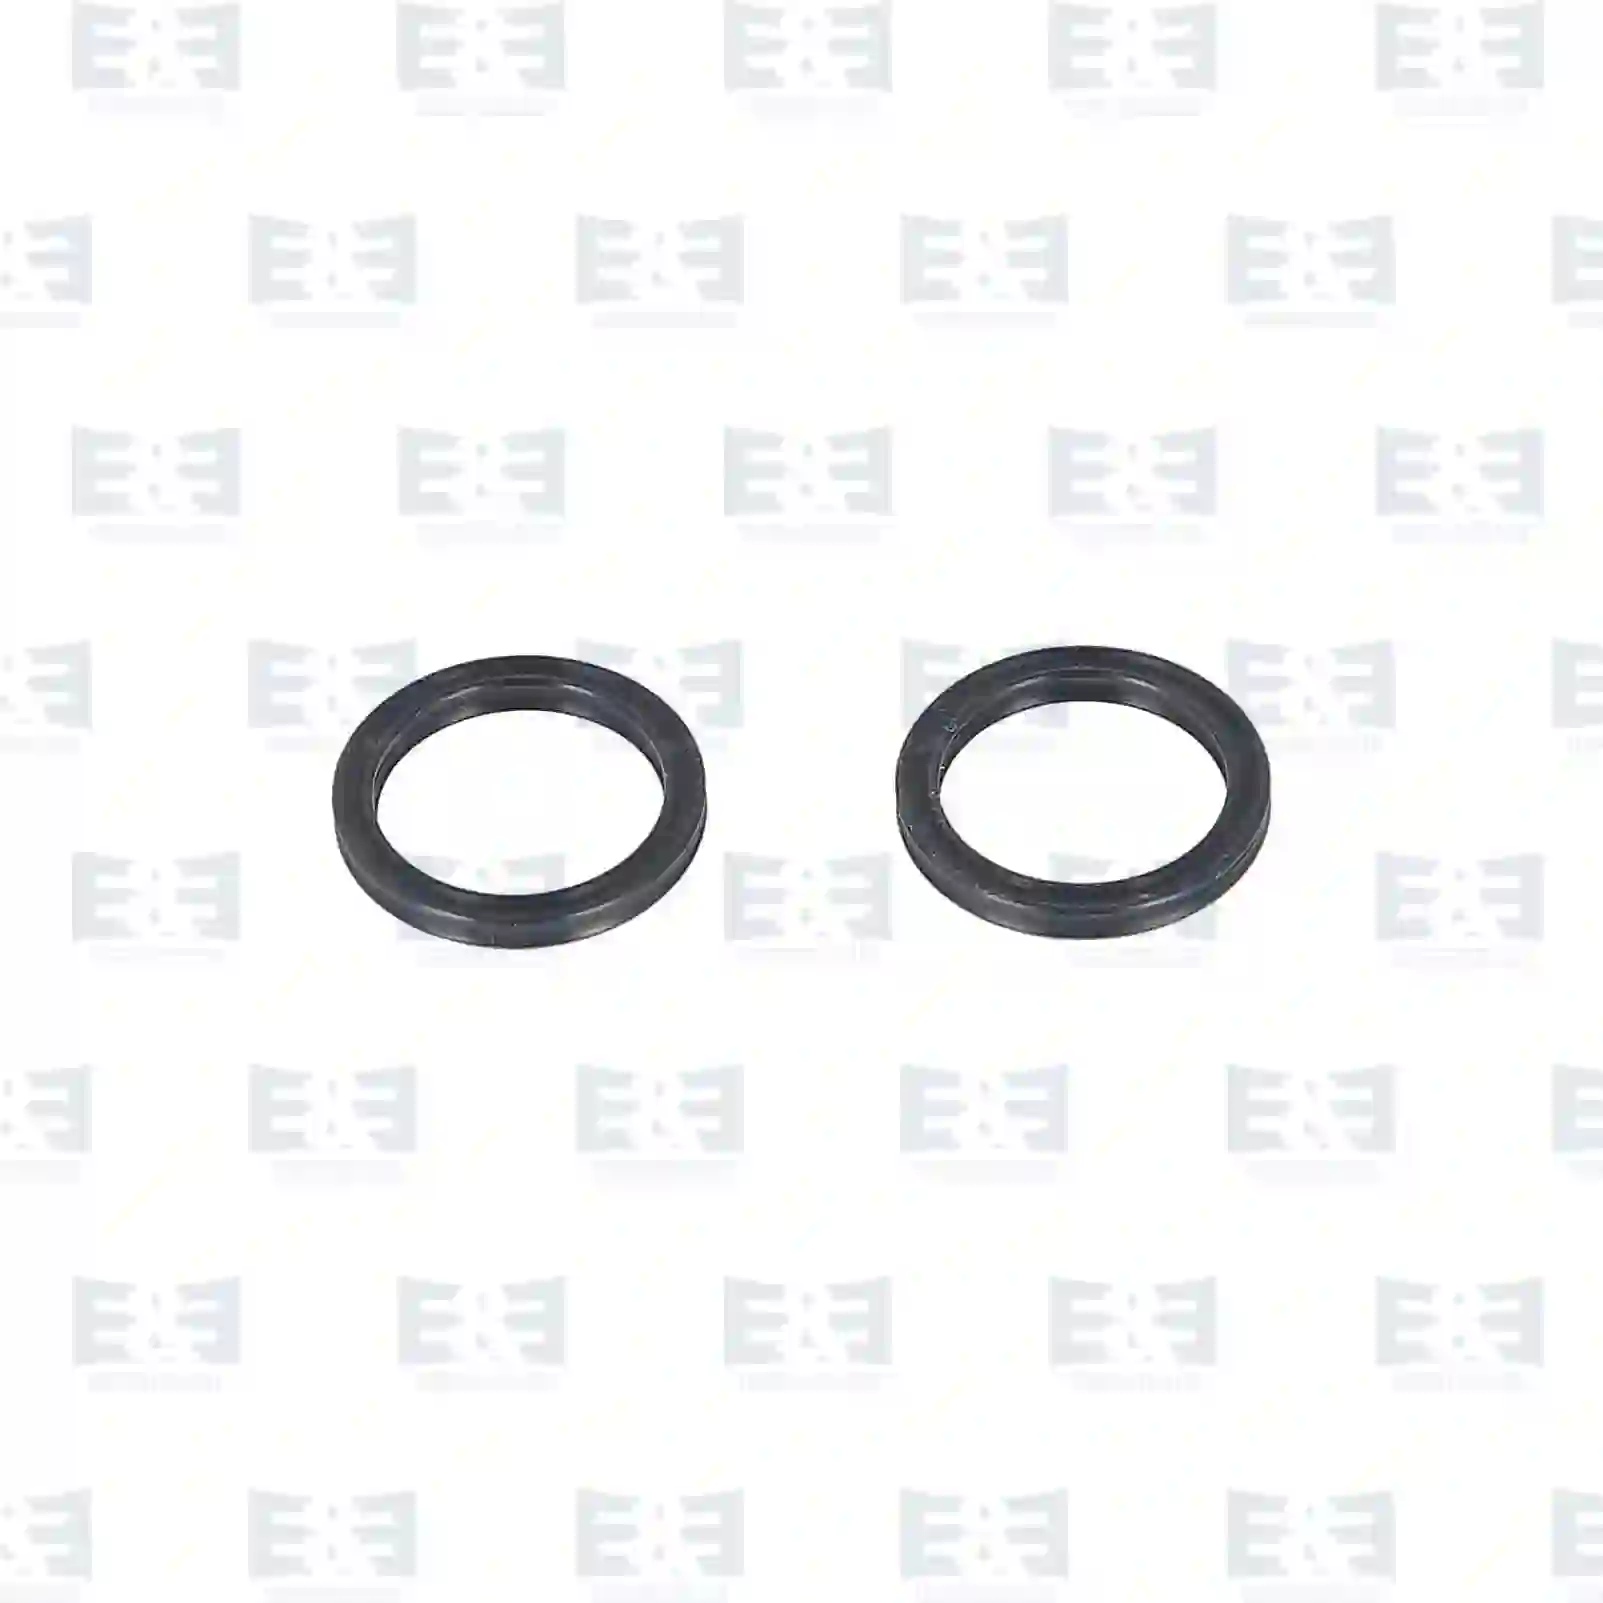  Seal ring kit, oil filter || E&E Truck Spare Parts | Truck Spare Parts, Auotomotive Spare Parts